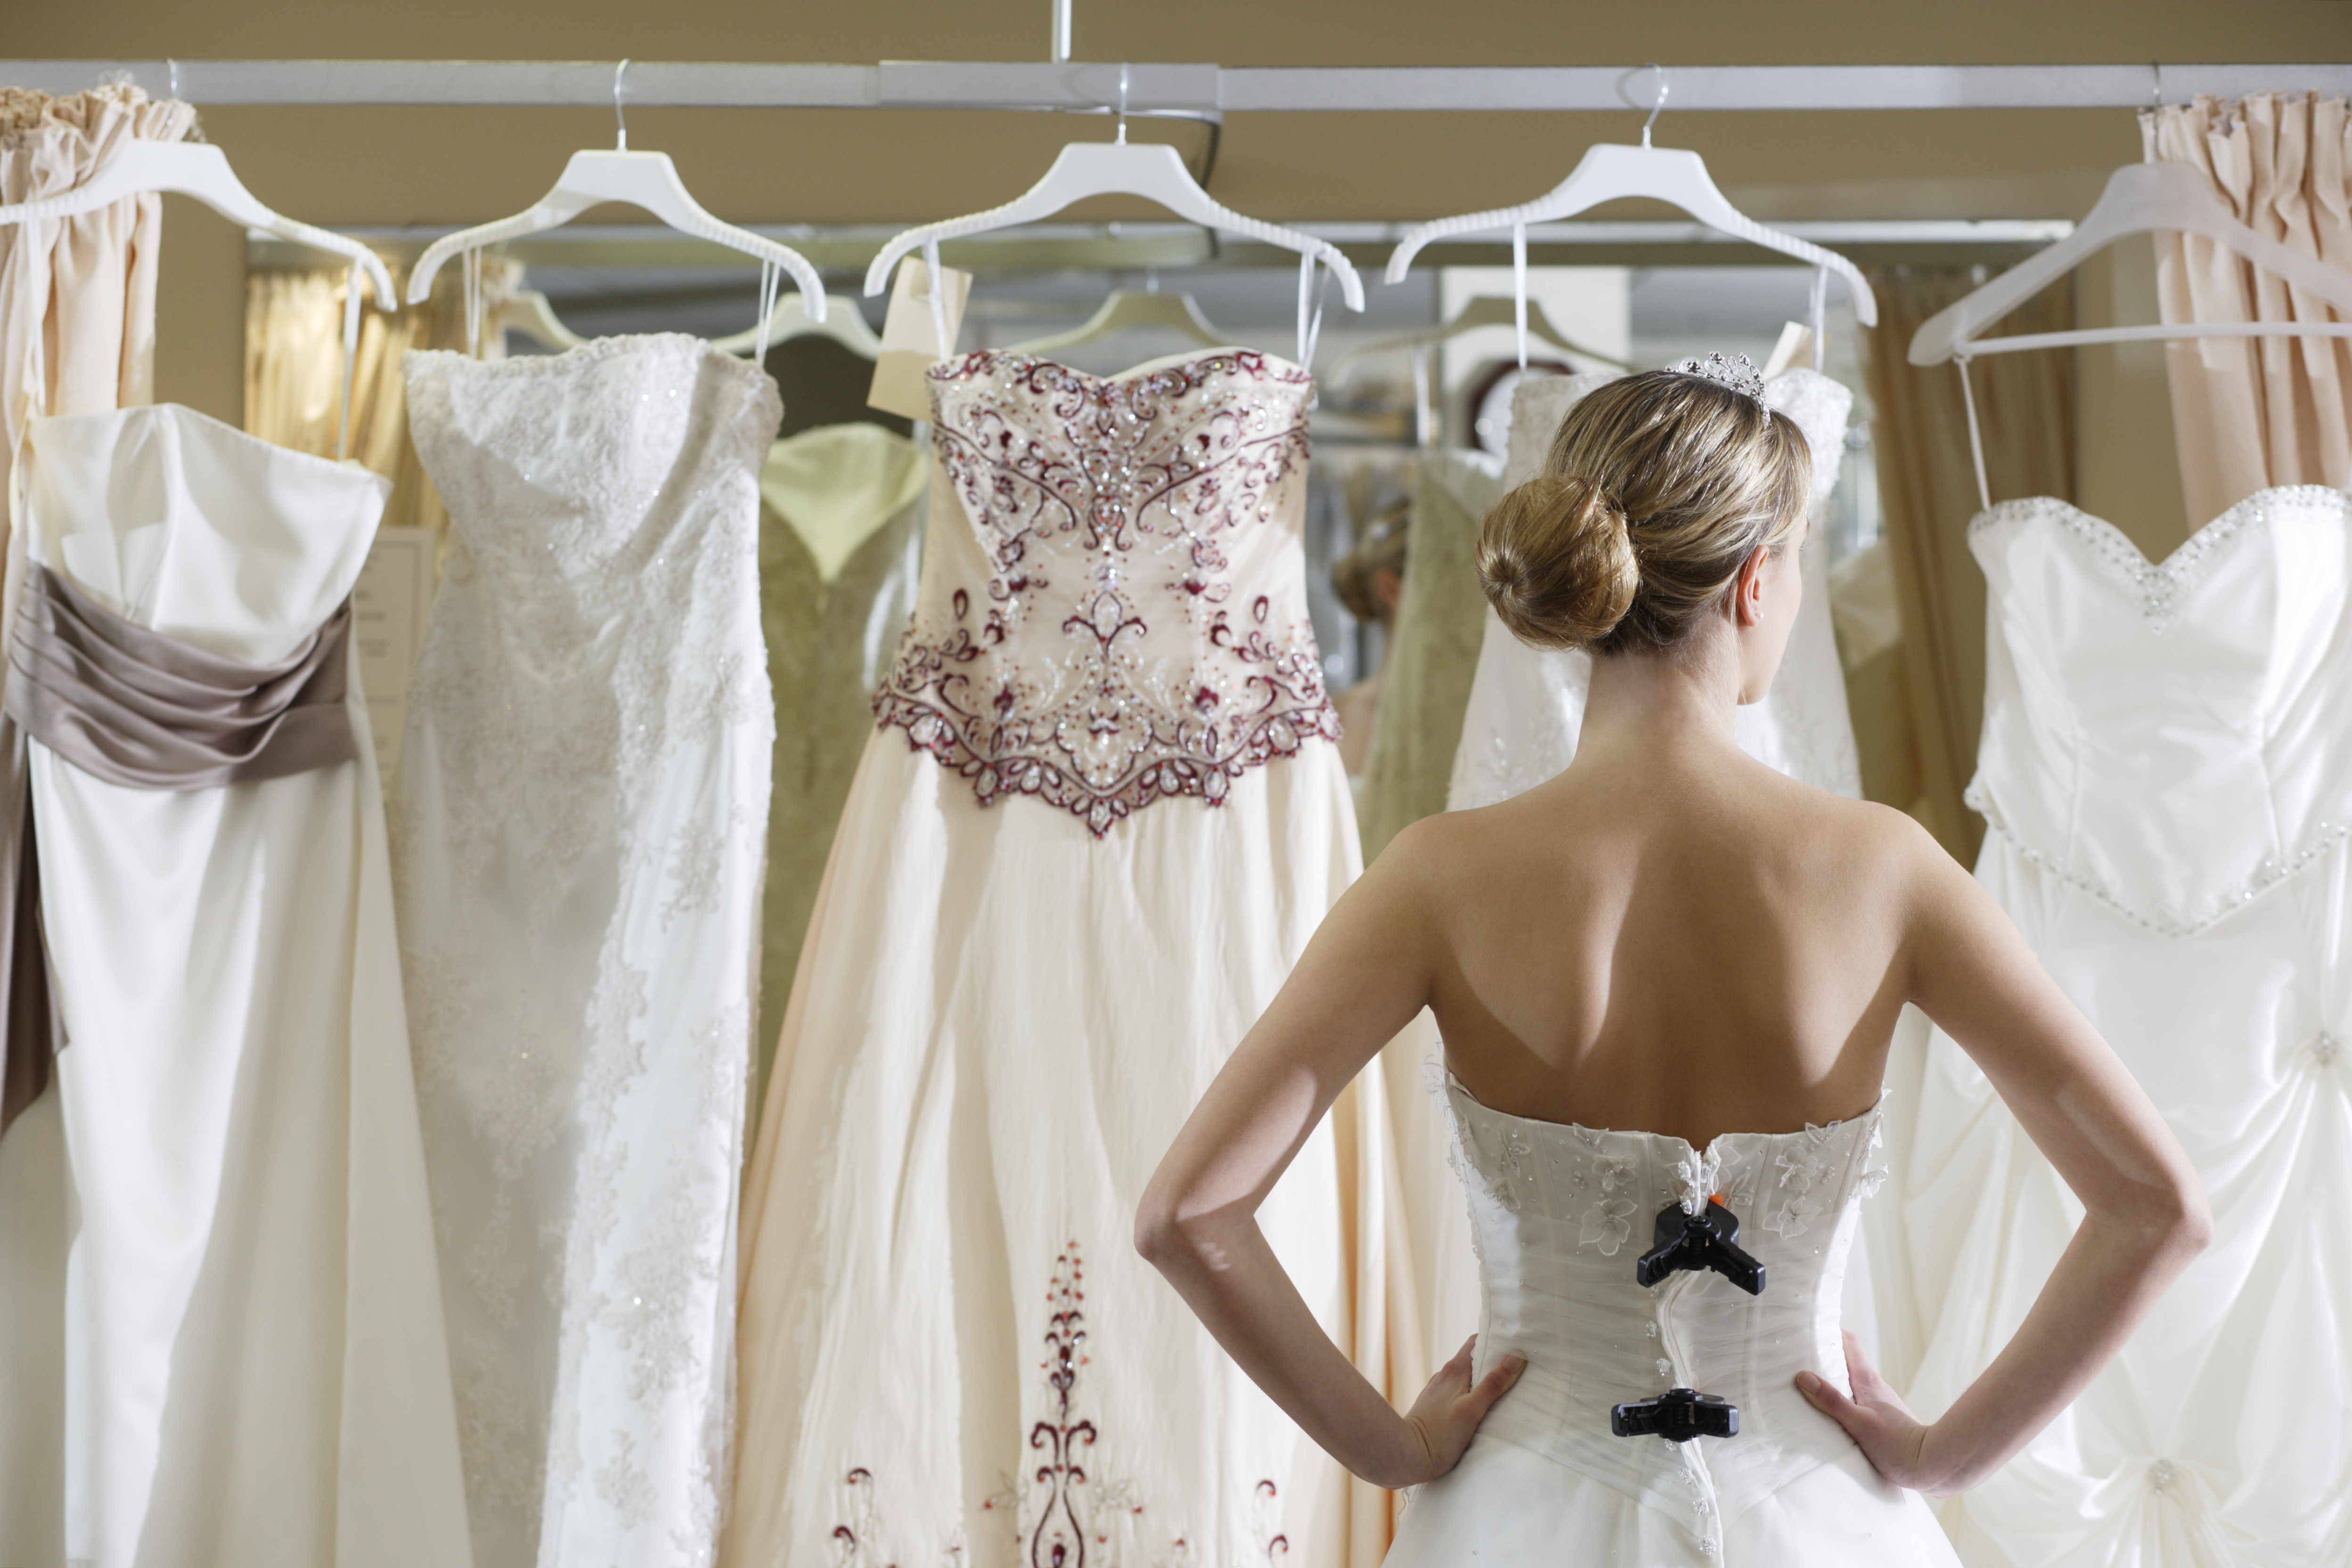 Bride looking at rack of dresses | Source: Getty Images